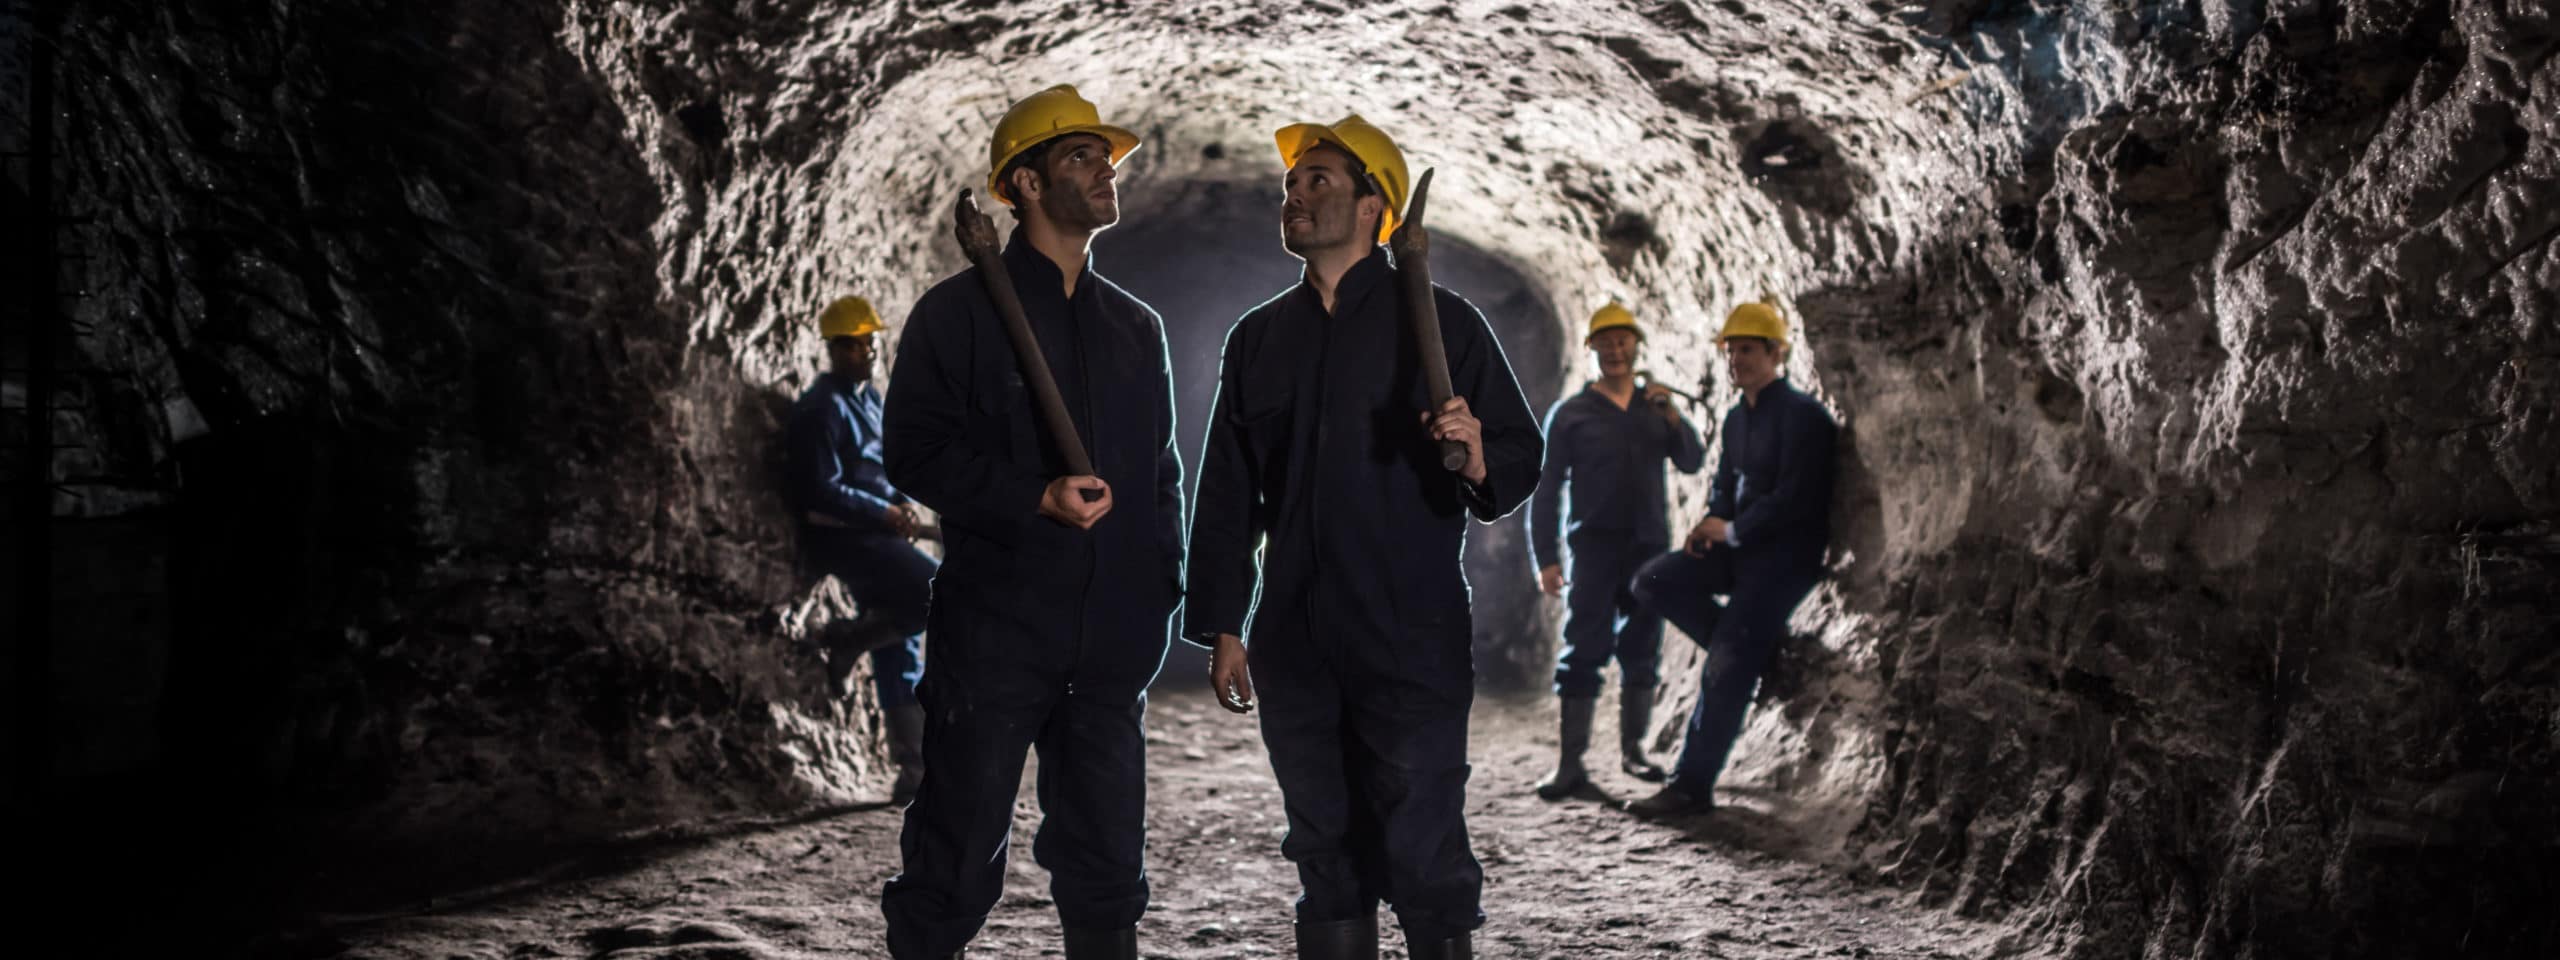 Black Lung Disease: Why Safety Matters in the Mines